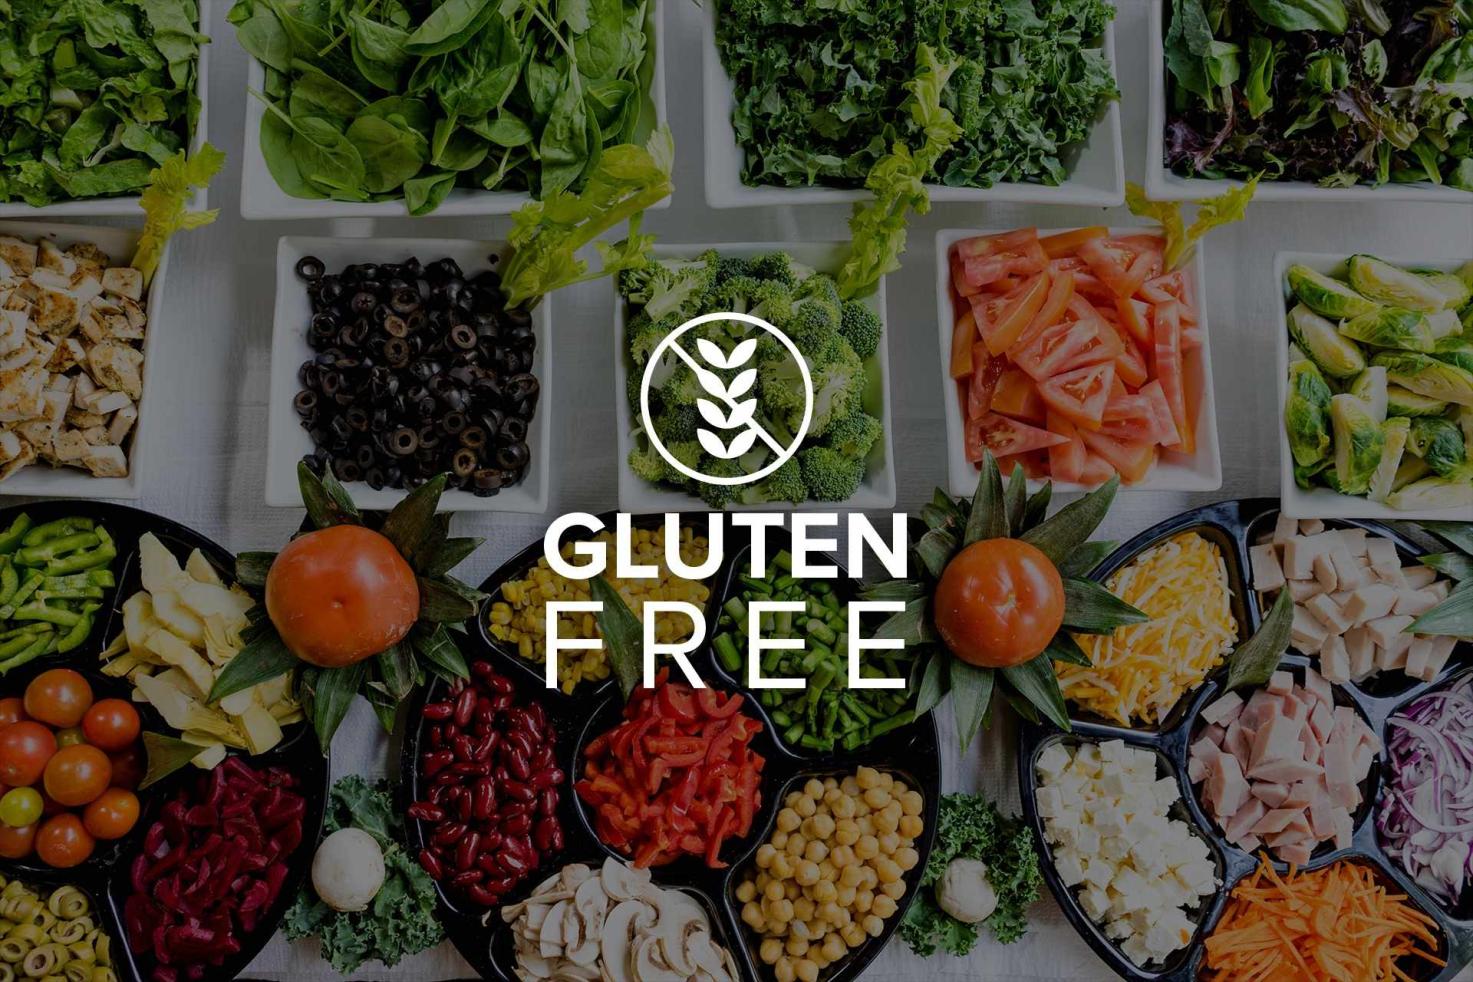 Gluten-Free Recipes: How Can I Ensure They're Truly Gluten-Free?